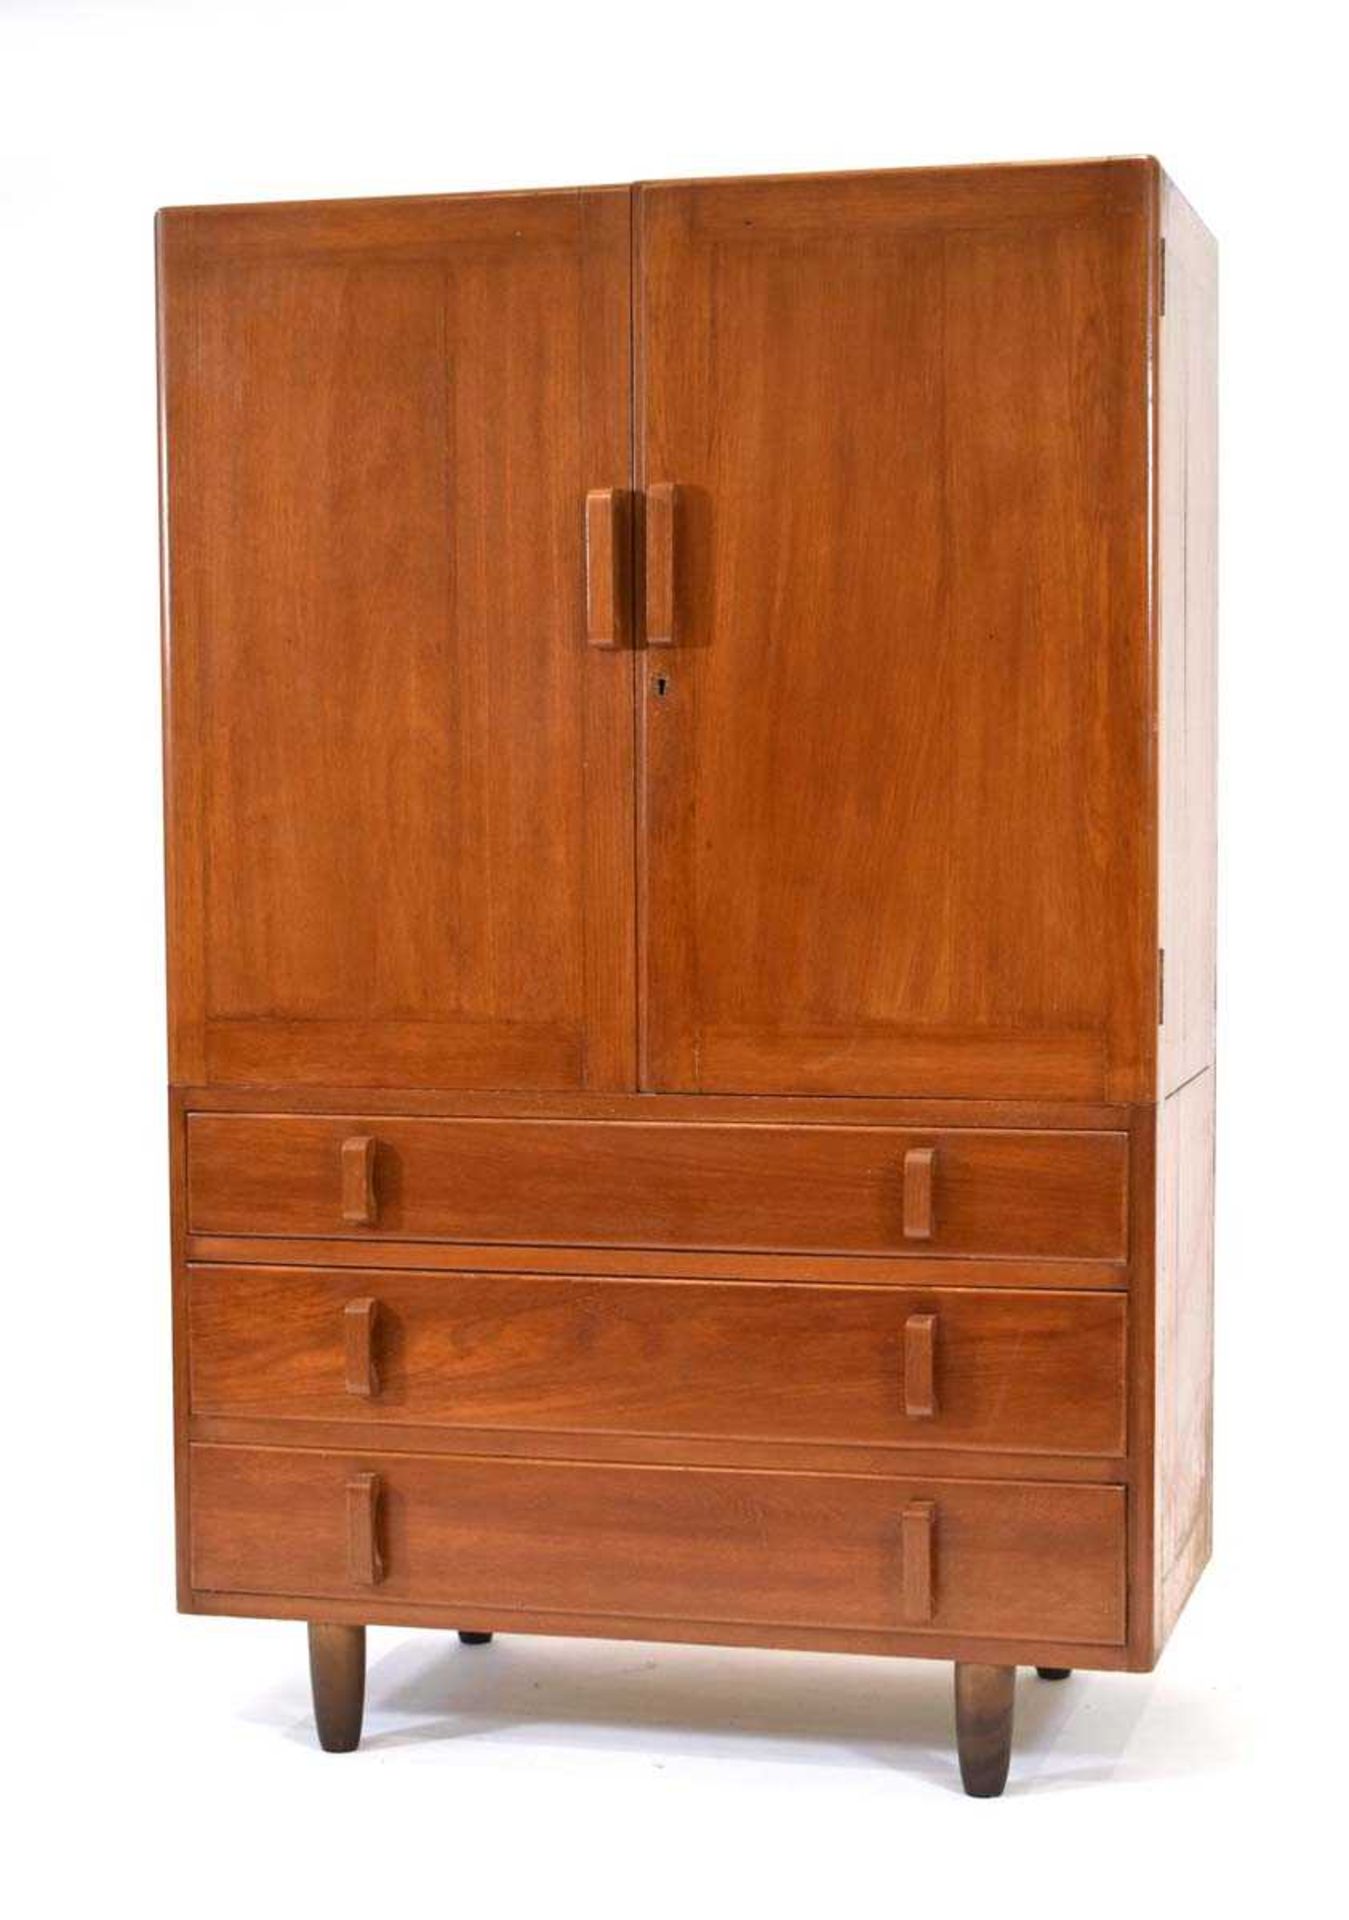 A 1950/60's solid teak dressing cabinet with two doors, two drawers and chunky handles, on later